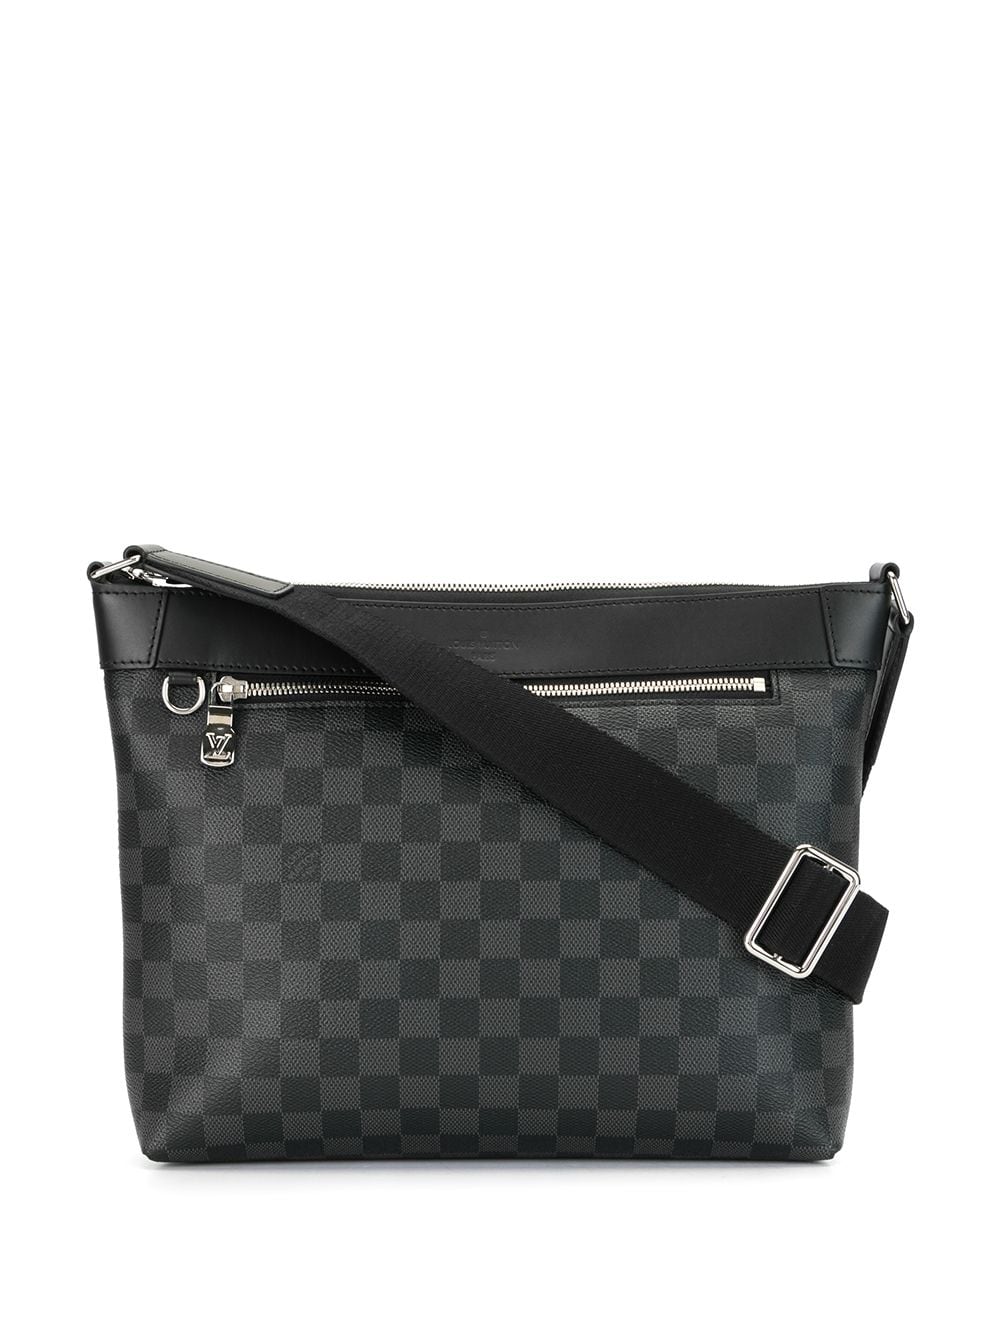 Mick pm leather bag Louis Vuitton Black in Leather - 35158177